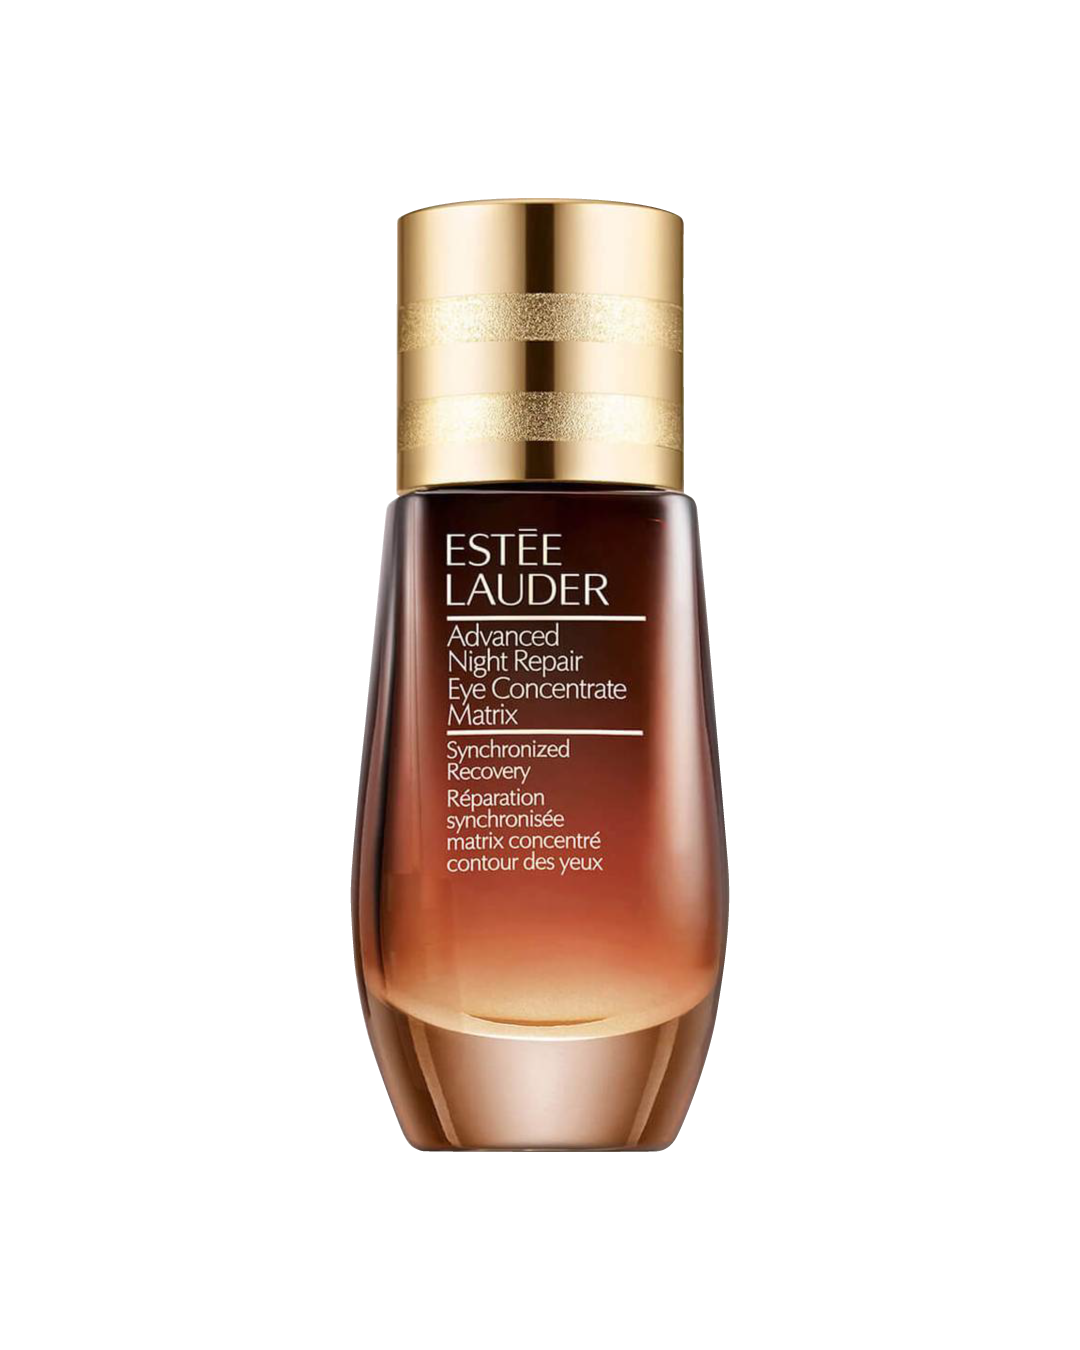 Estee Lauder Advanced Night Repair Eye Concentrate Matrix Synchronized Recovery (15ml) - Best Buy World Philippines